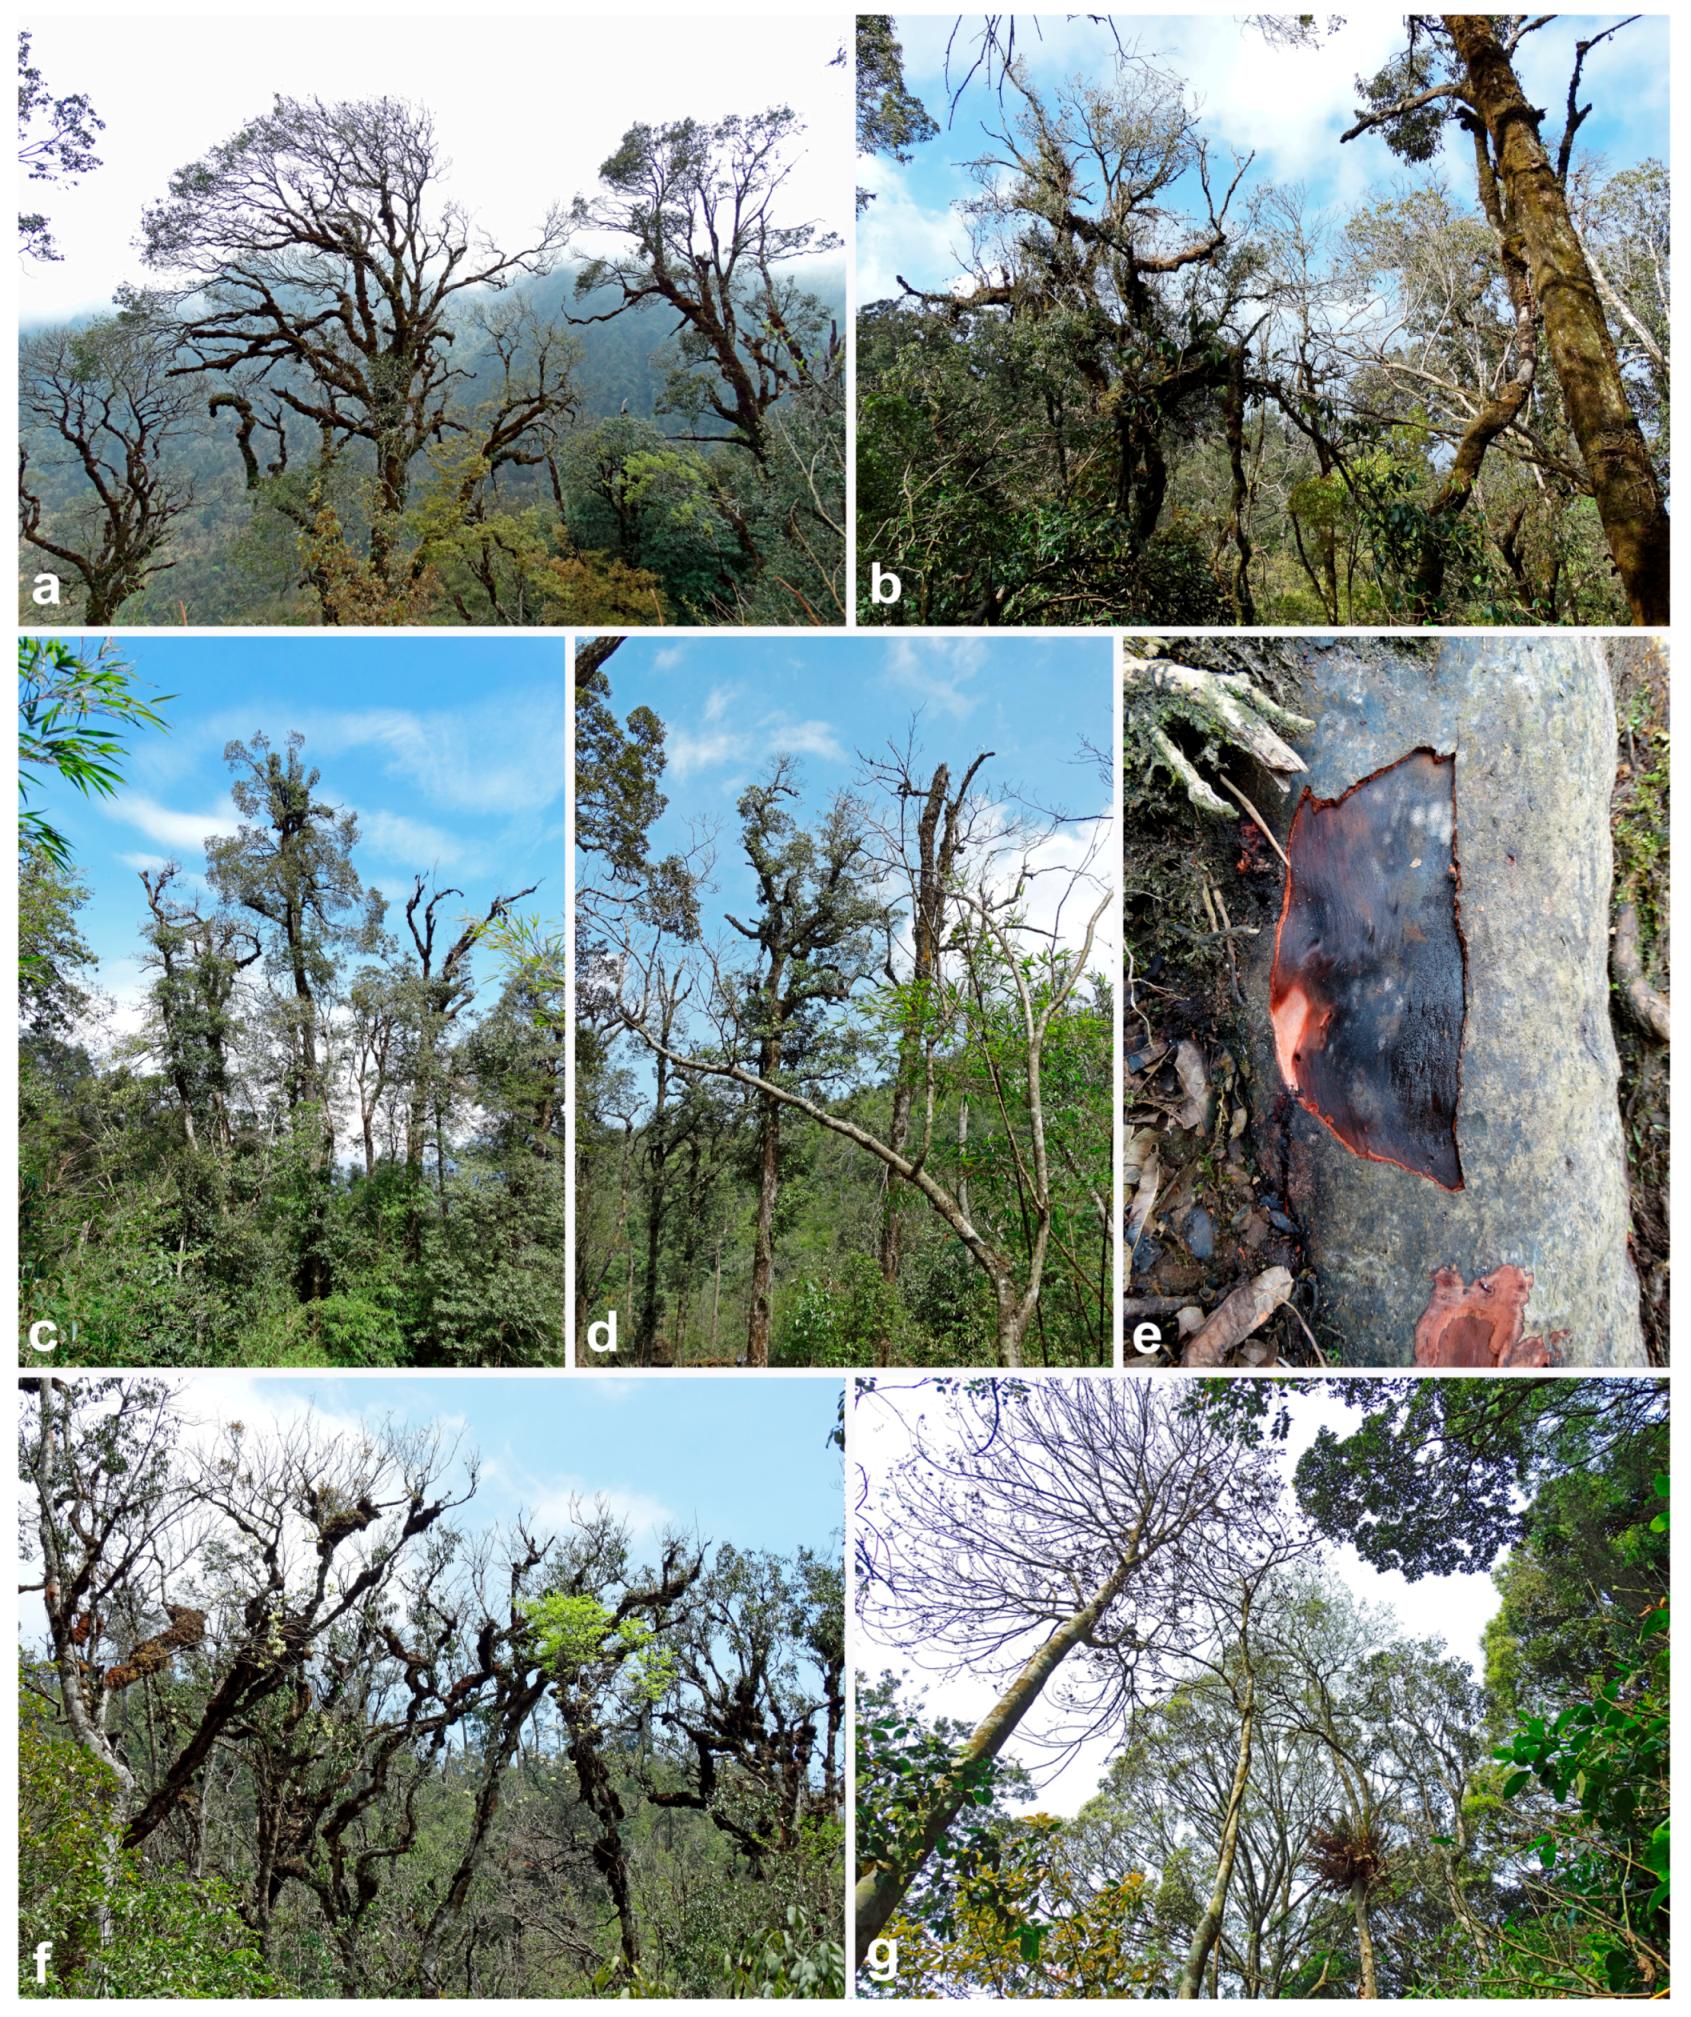 Forests | Free Full-Text | in Natural Forest Ecosystems of Vietnam Reveals High Diversity of both New and Described Phytophthora Taxa including P. ramorum | HTML